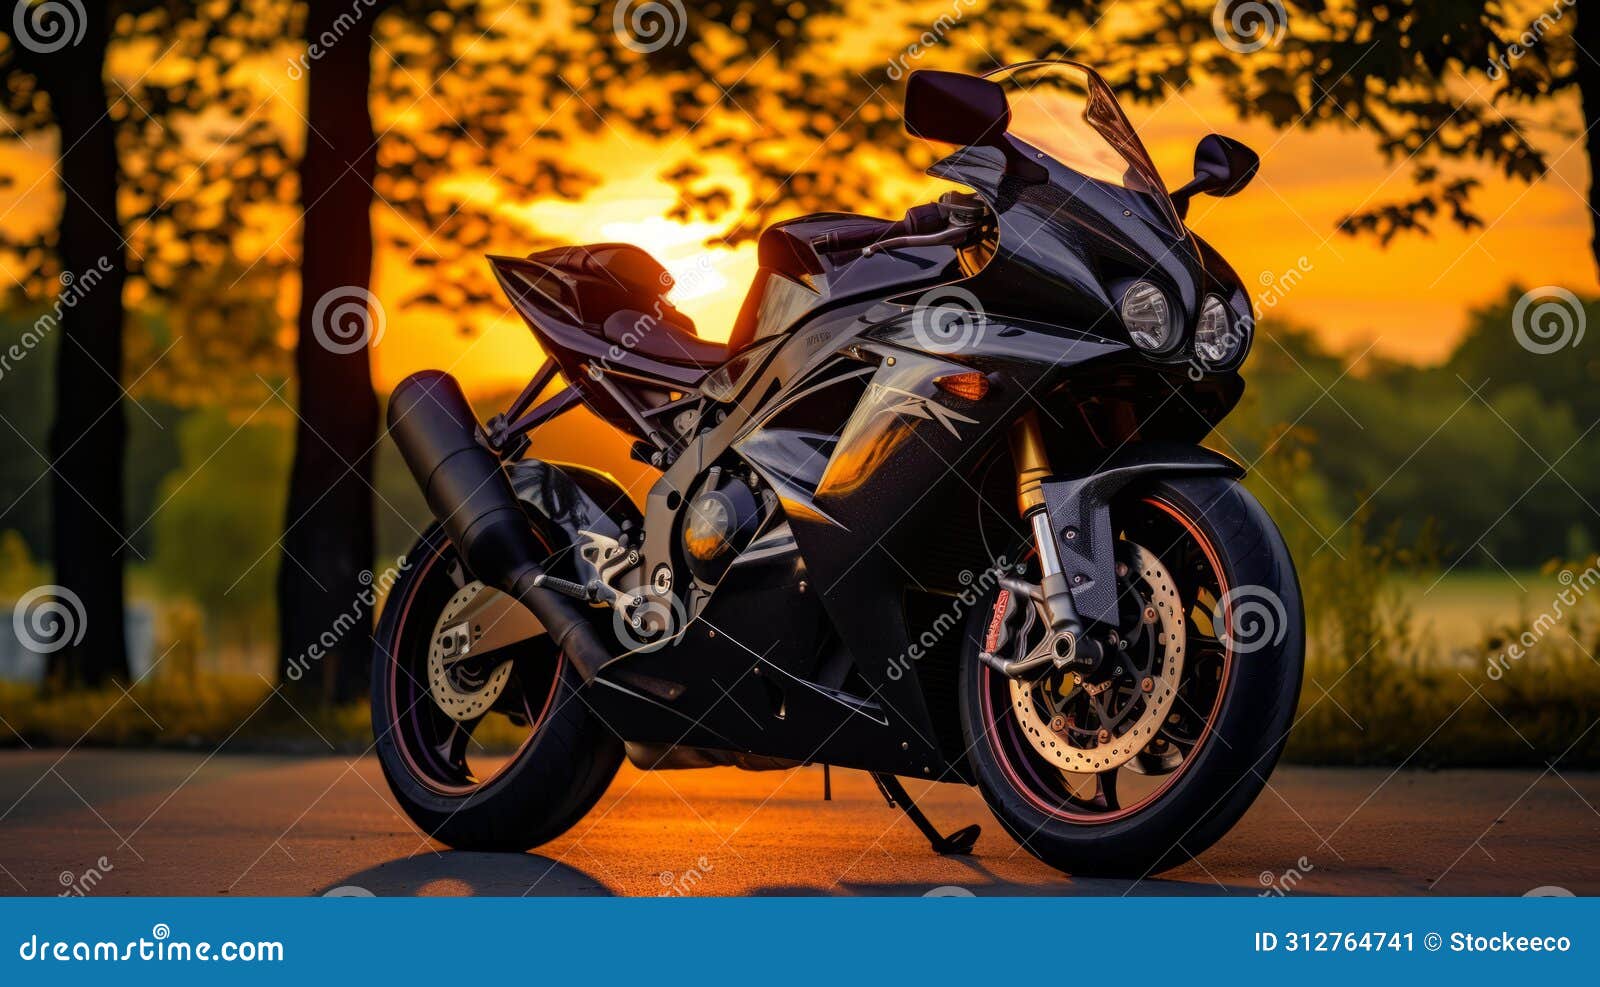 sunlit motorbike: dark silver and gold in richly colored skies